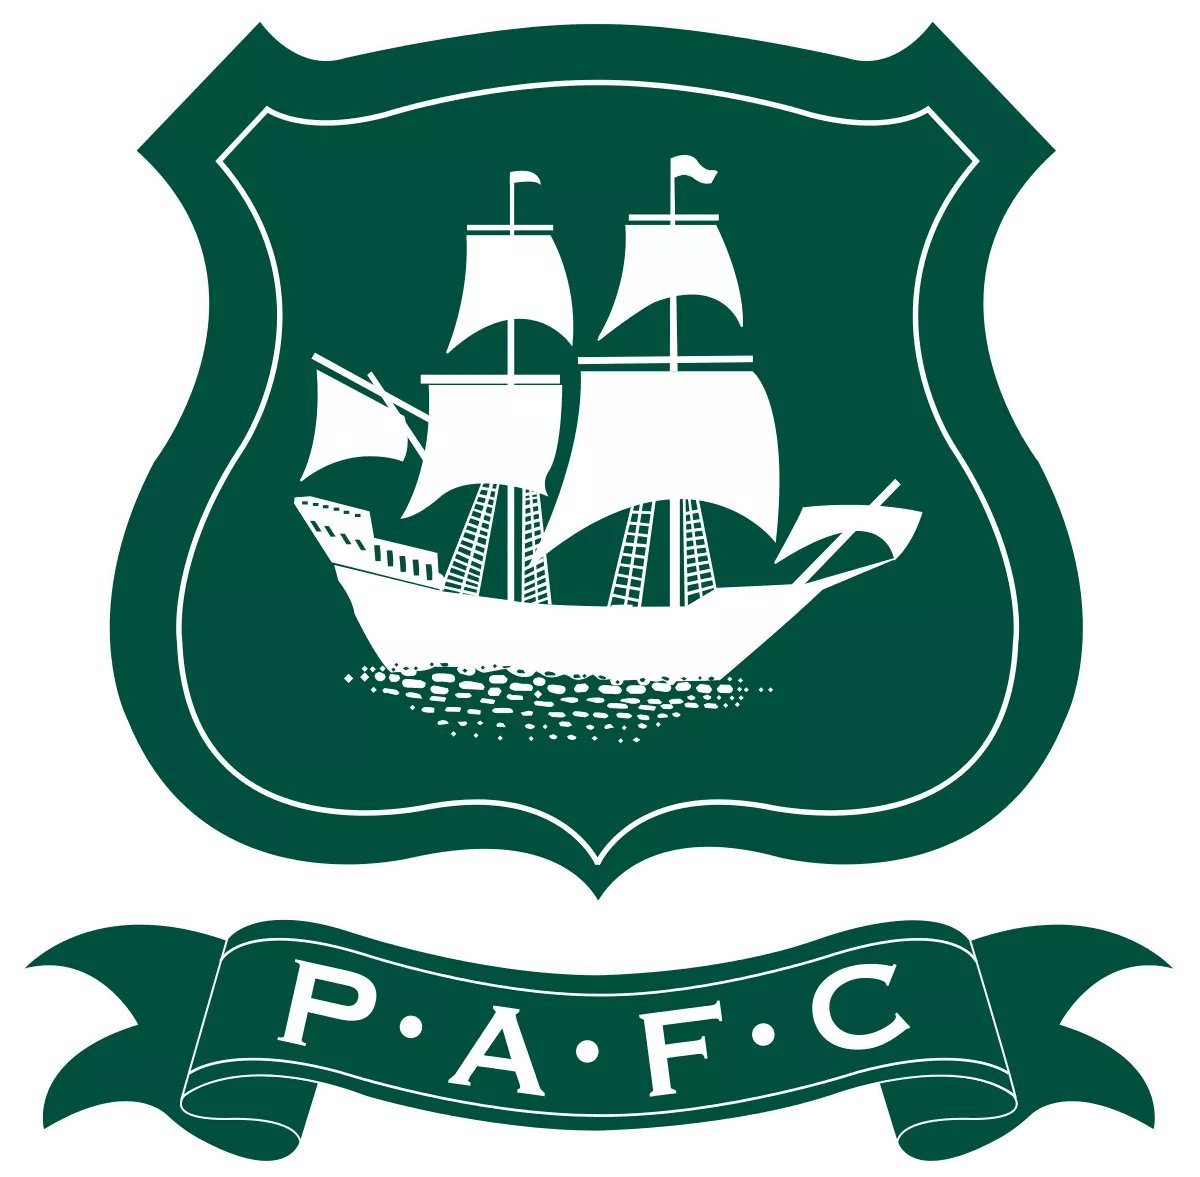 66) Plymouth Argyle Points: 103 Manager: Darren Way Cornwall: good for holidays, not so good at producing footballers. Still, a centre back partnership of Jack Stephens and Sean Morrison is very solid for this league.